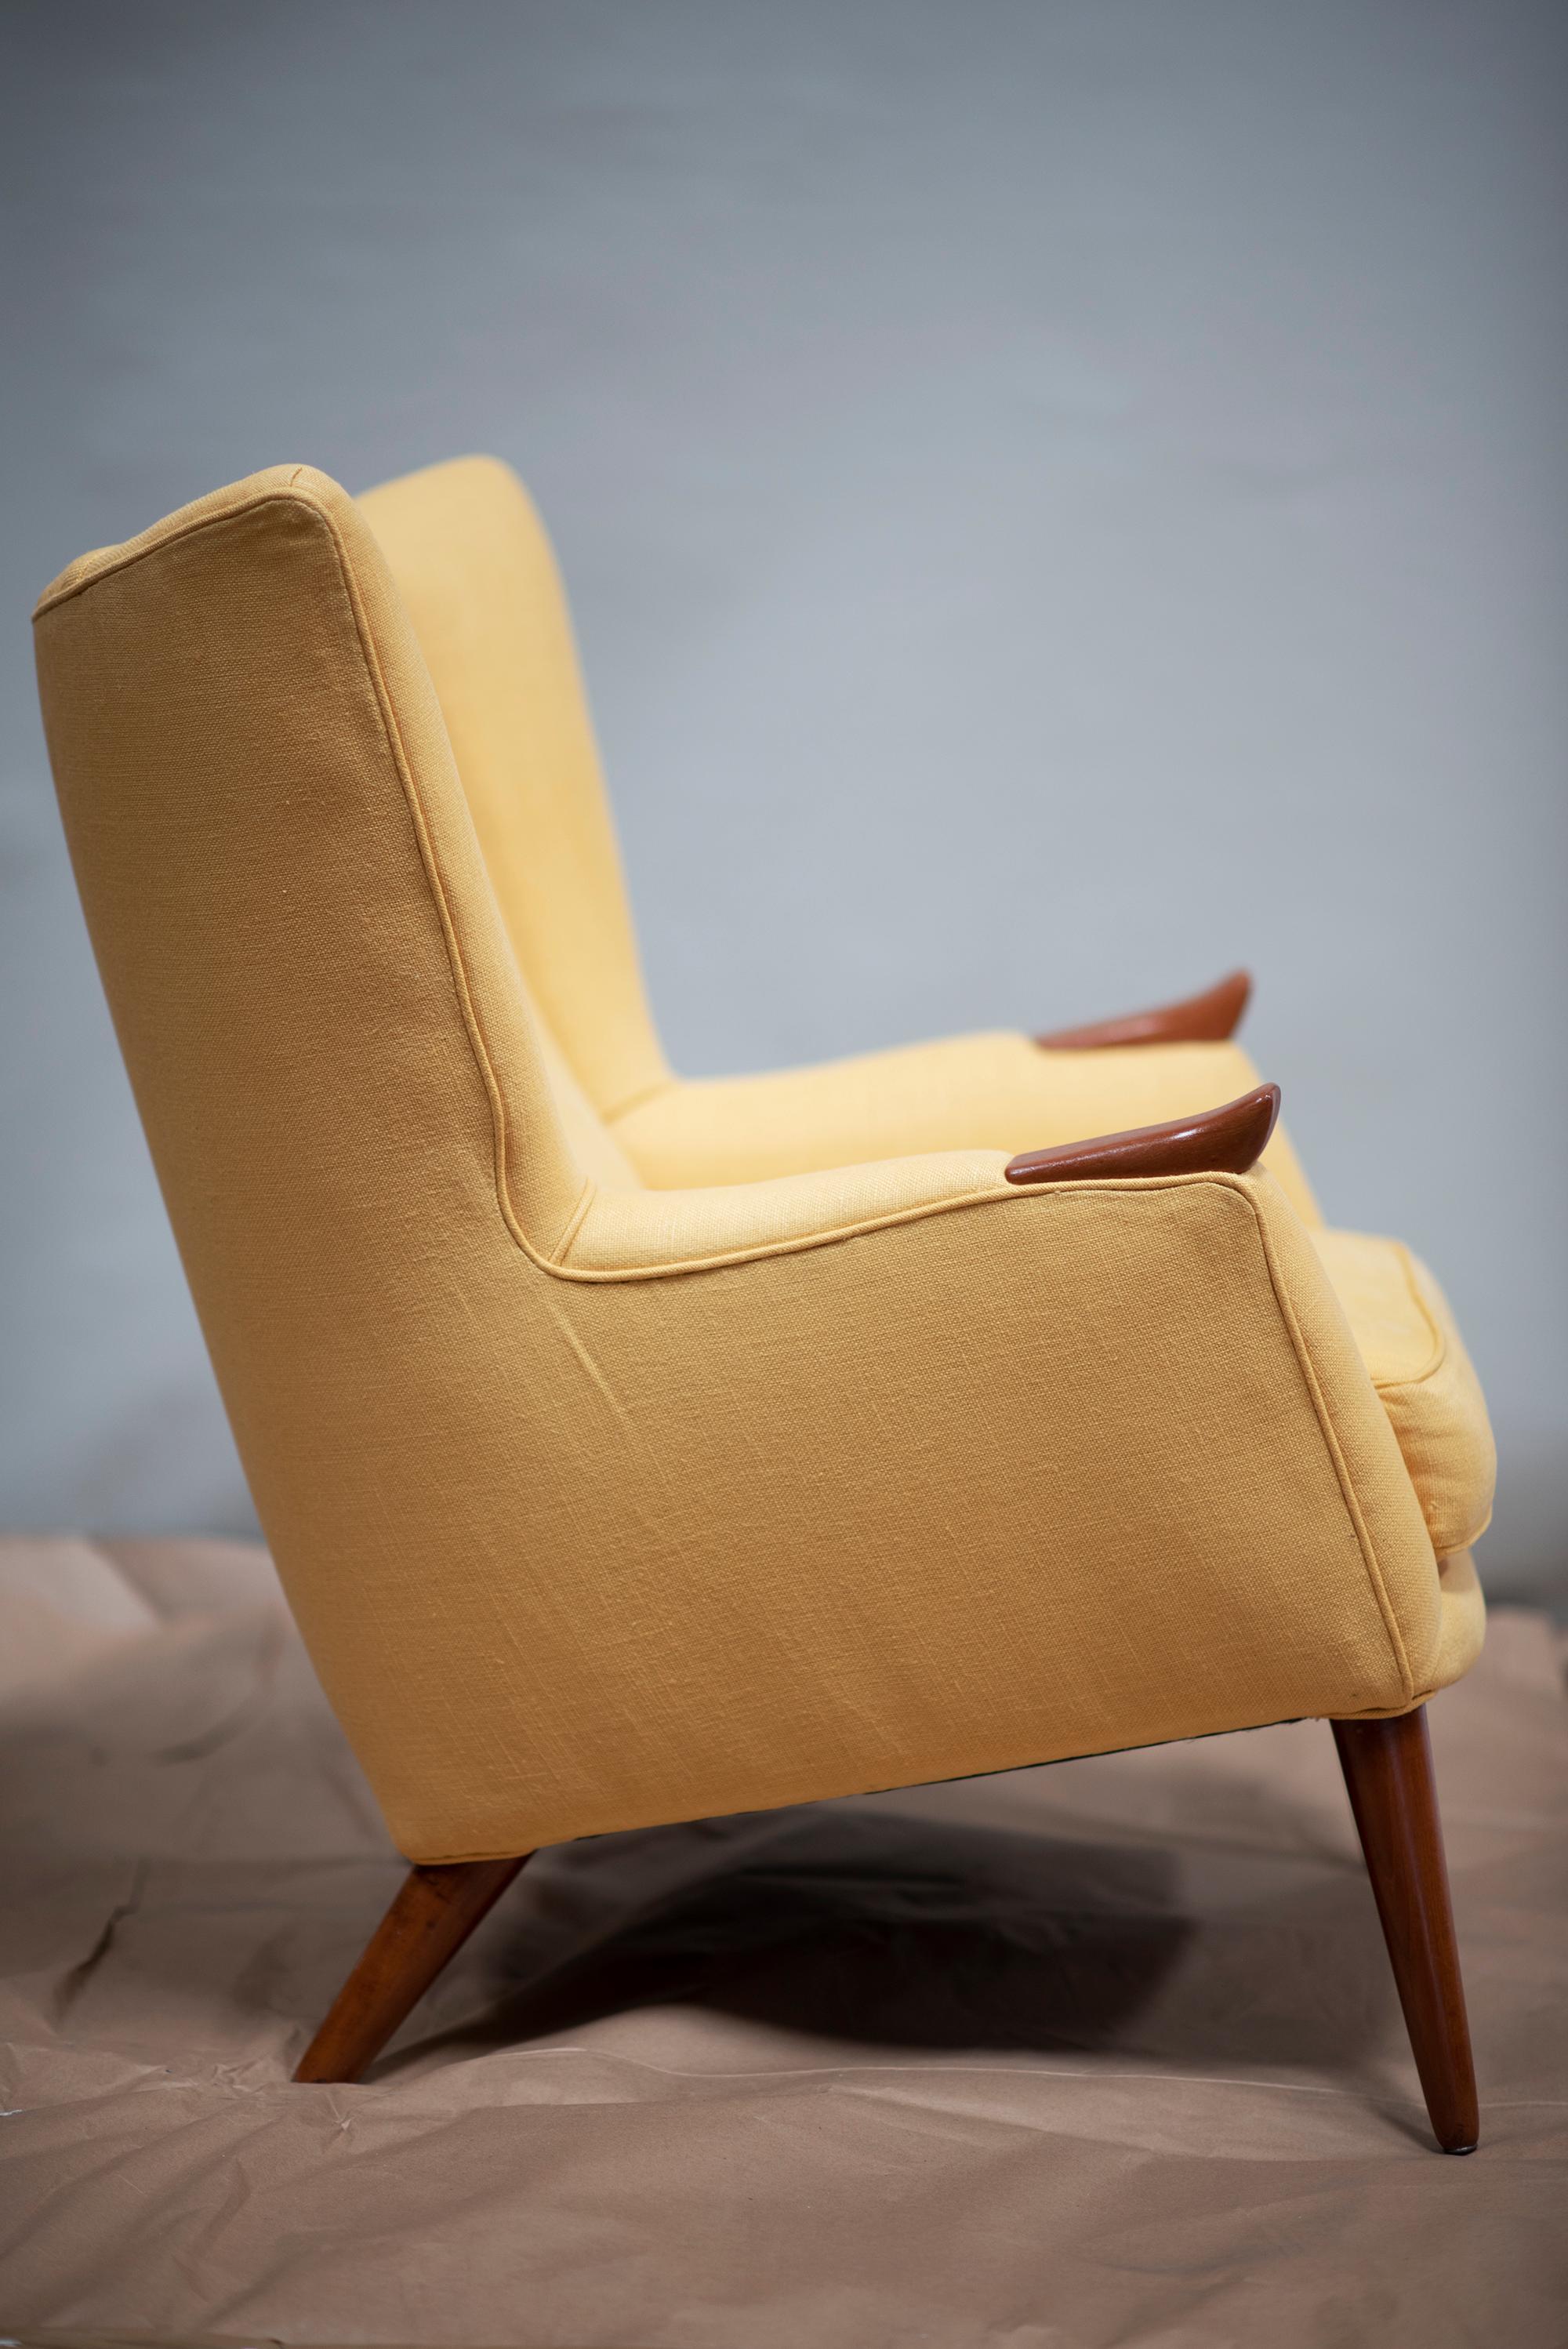 Mid-20th Century DANISH MODERN Lounge Chairs [PAIR] For Sale